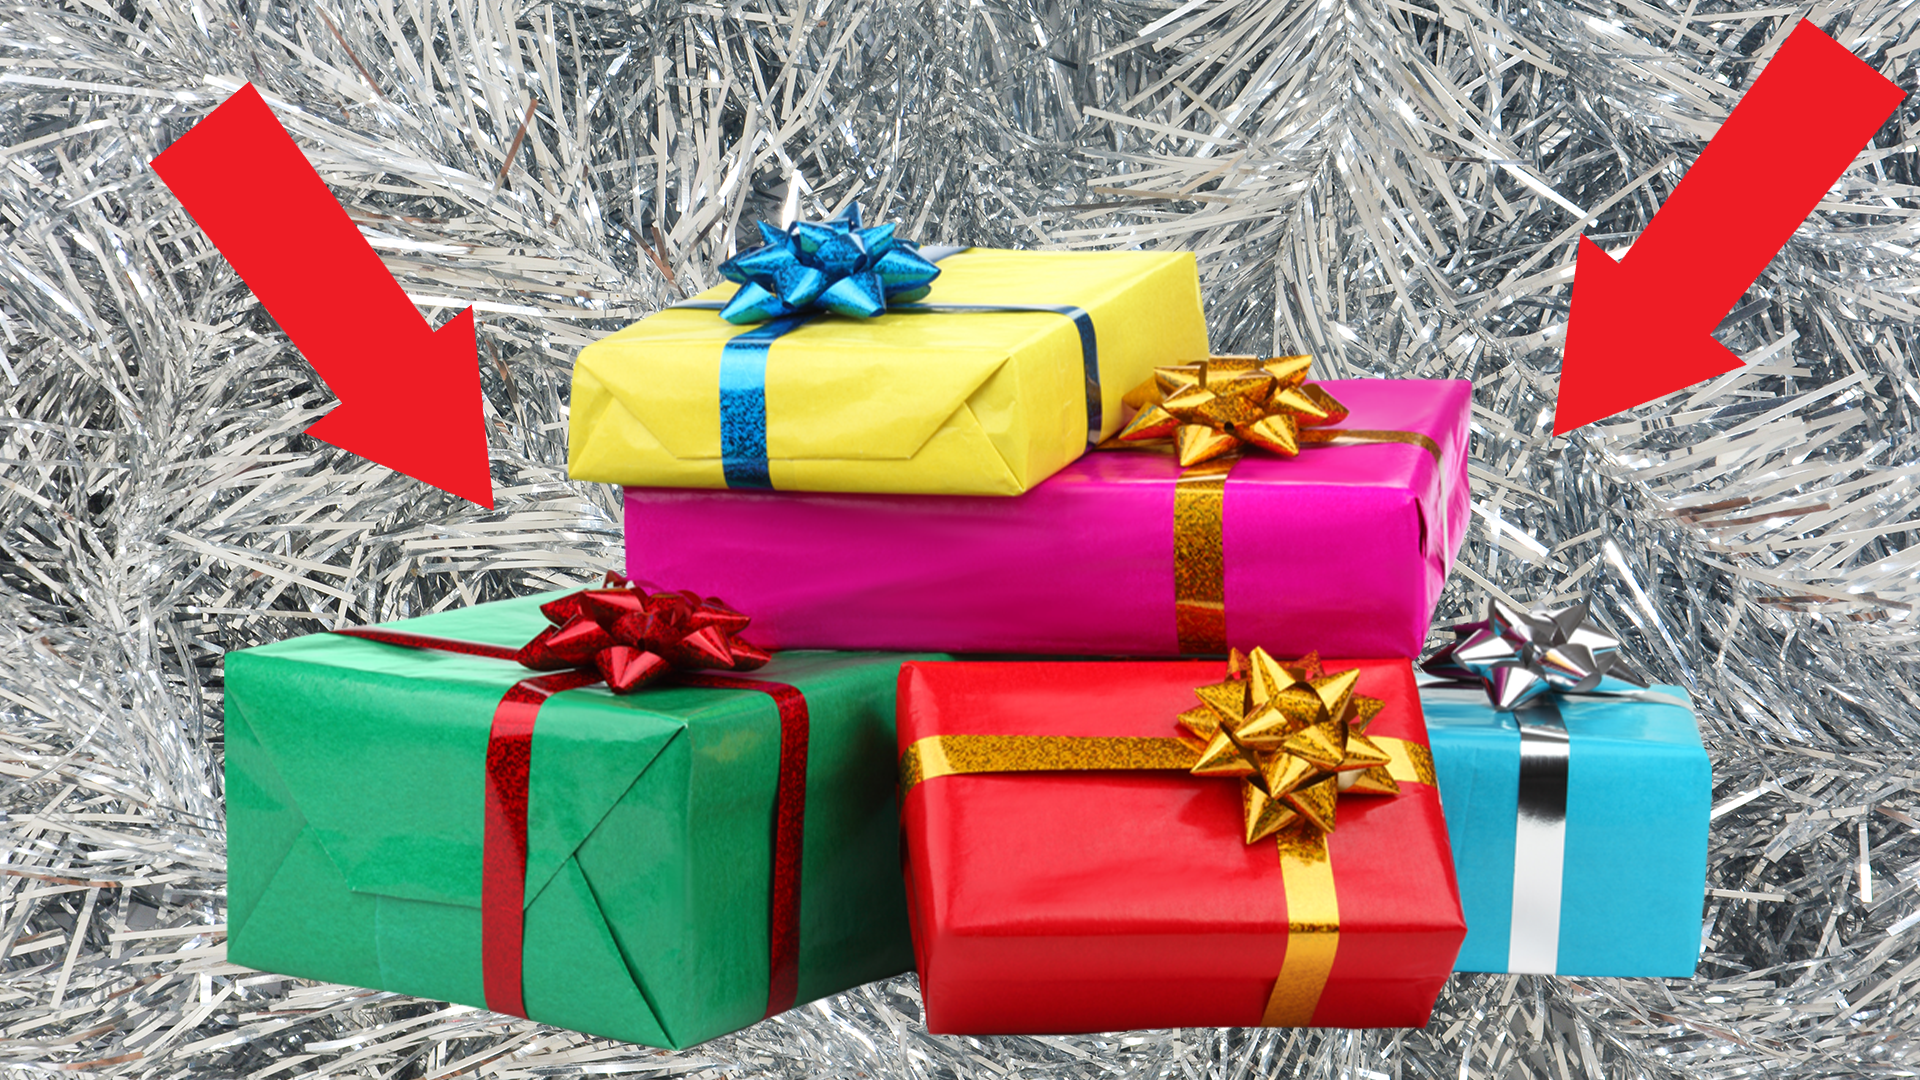 Presents and arrows on tinsel background